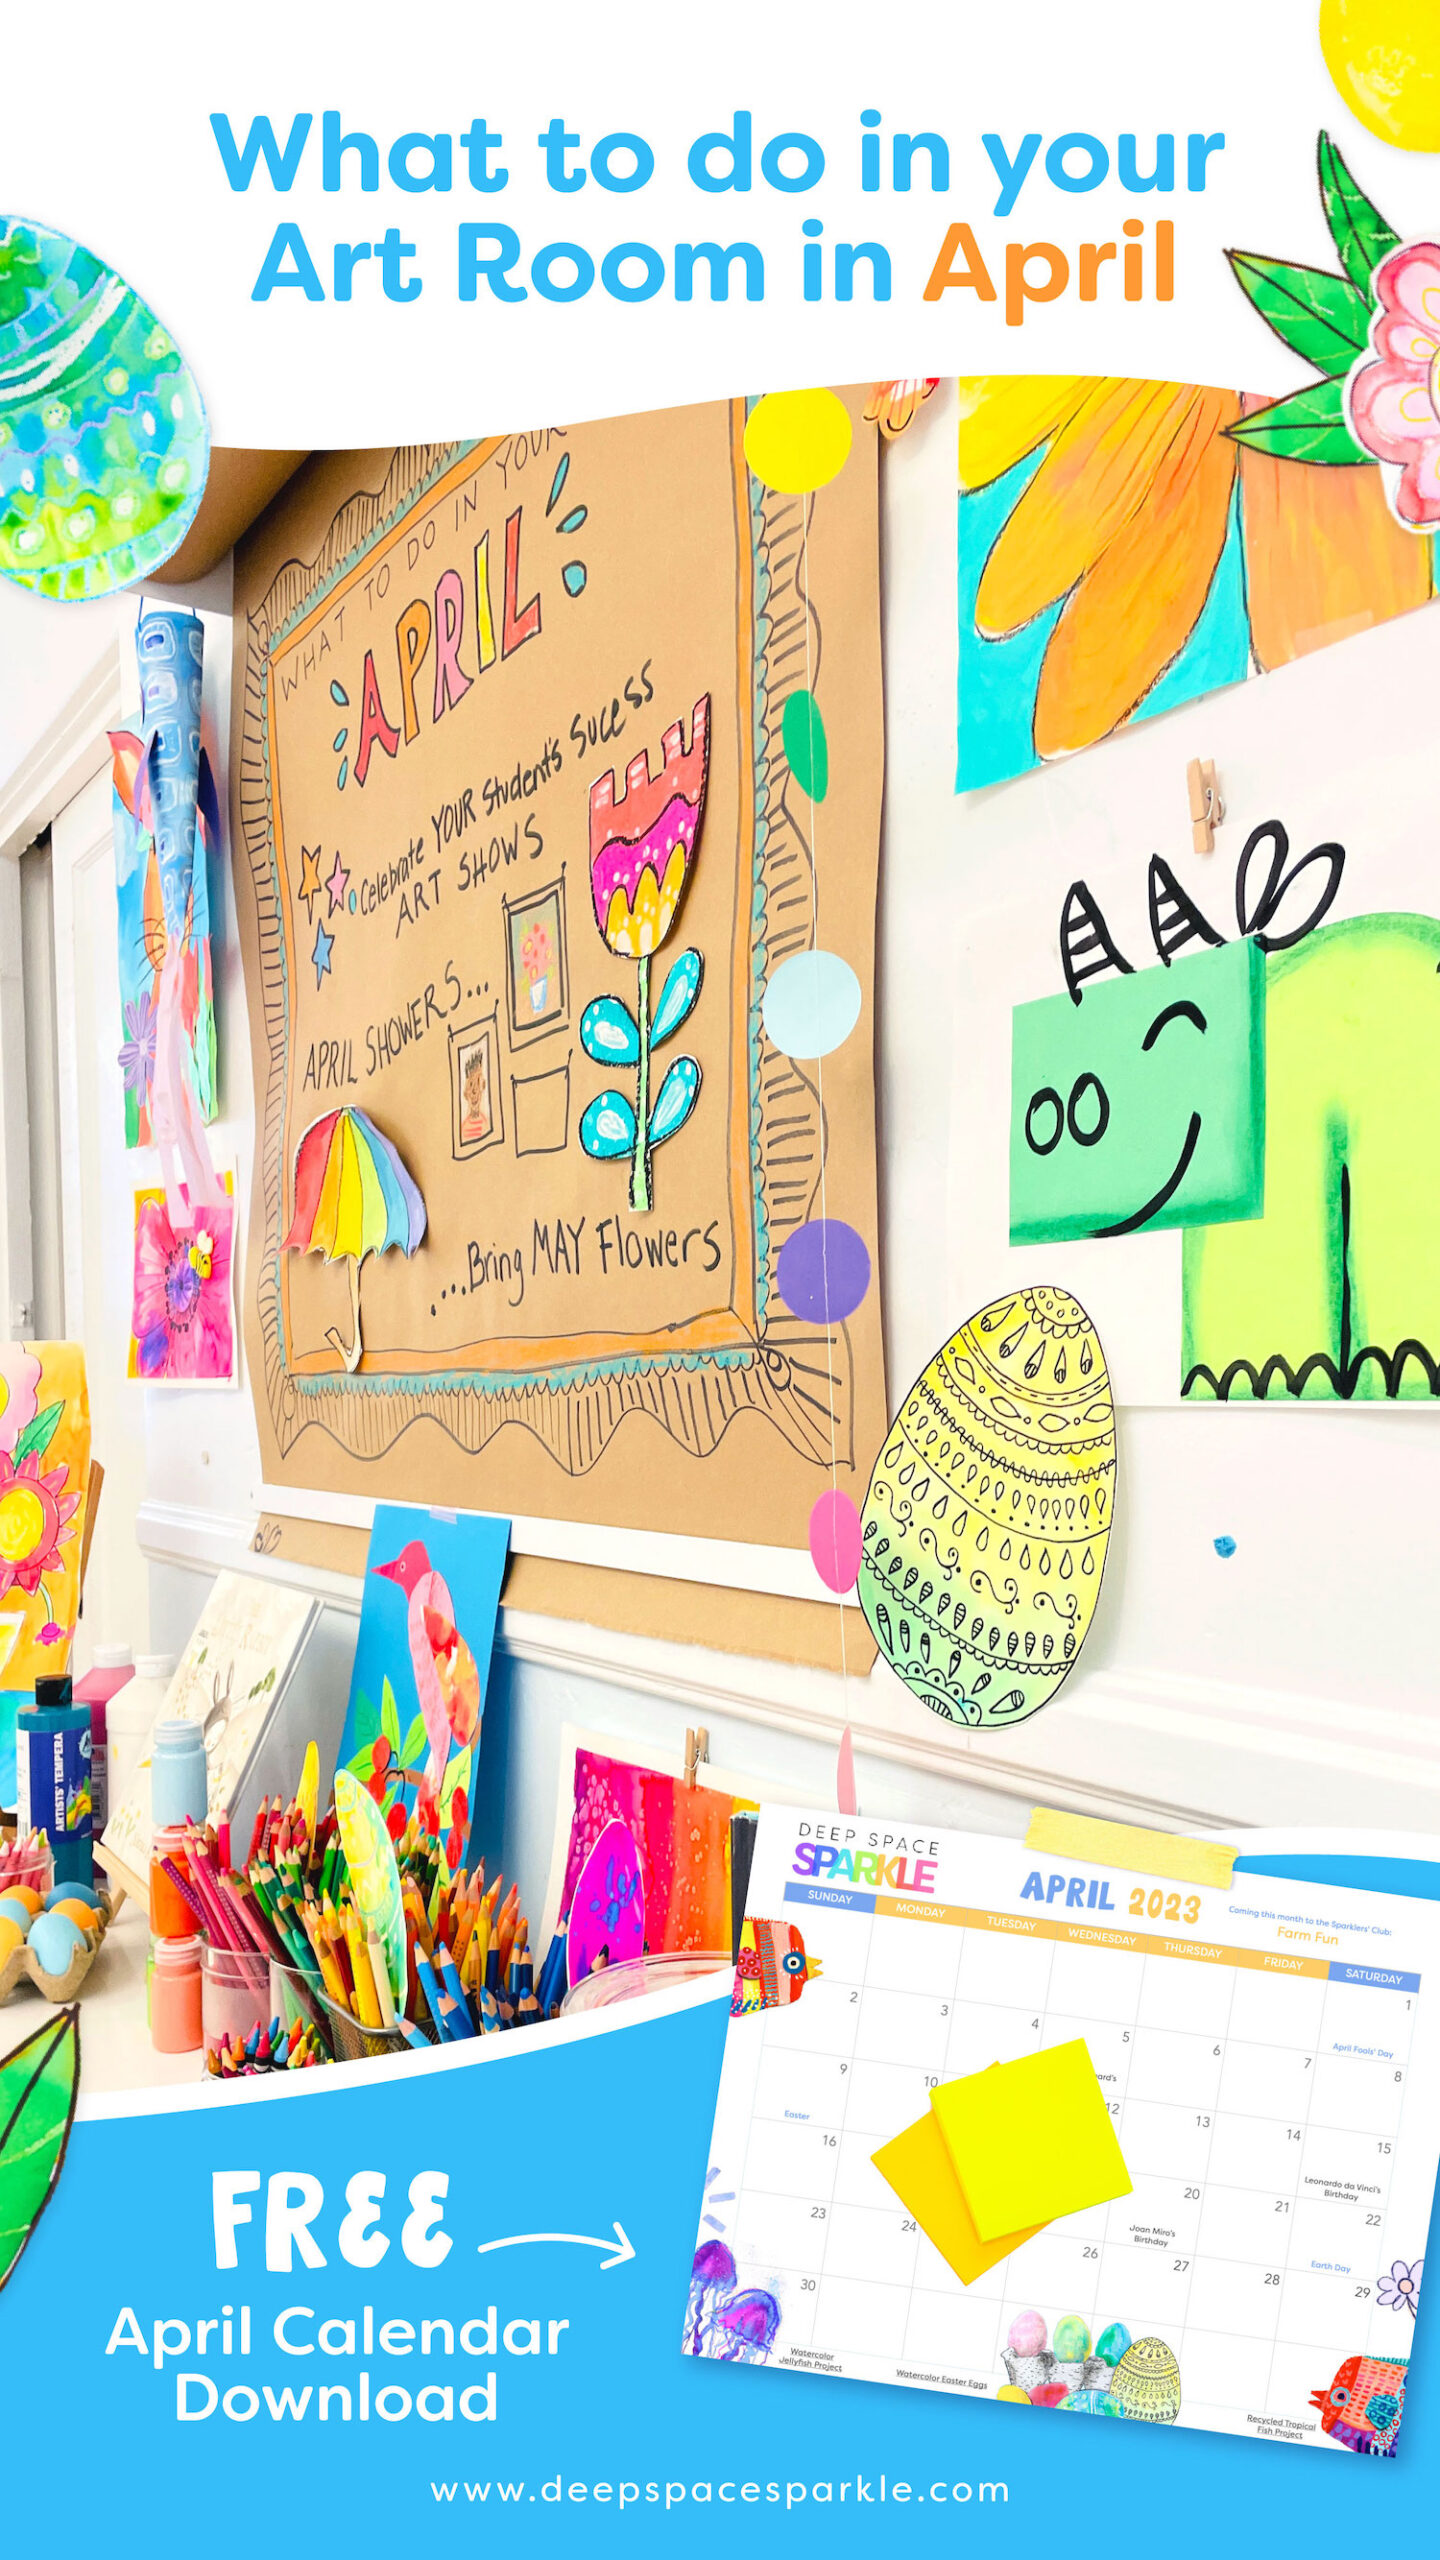 8 Things You Need in Your Art Room to Make Your Life Easier - The